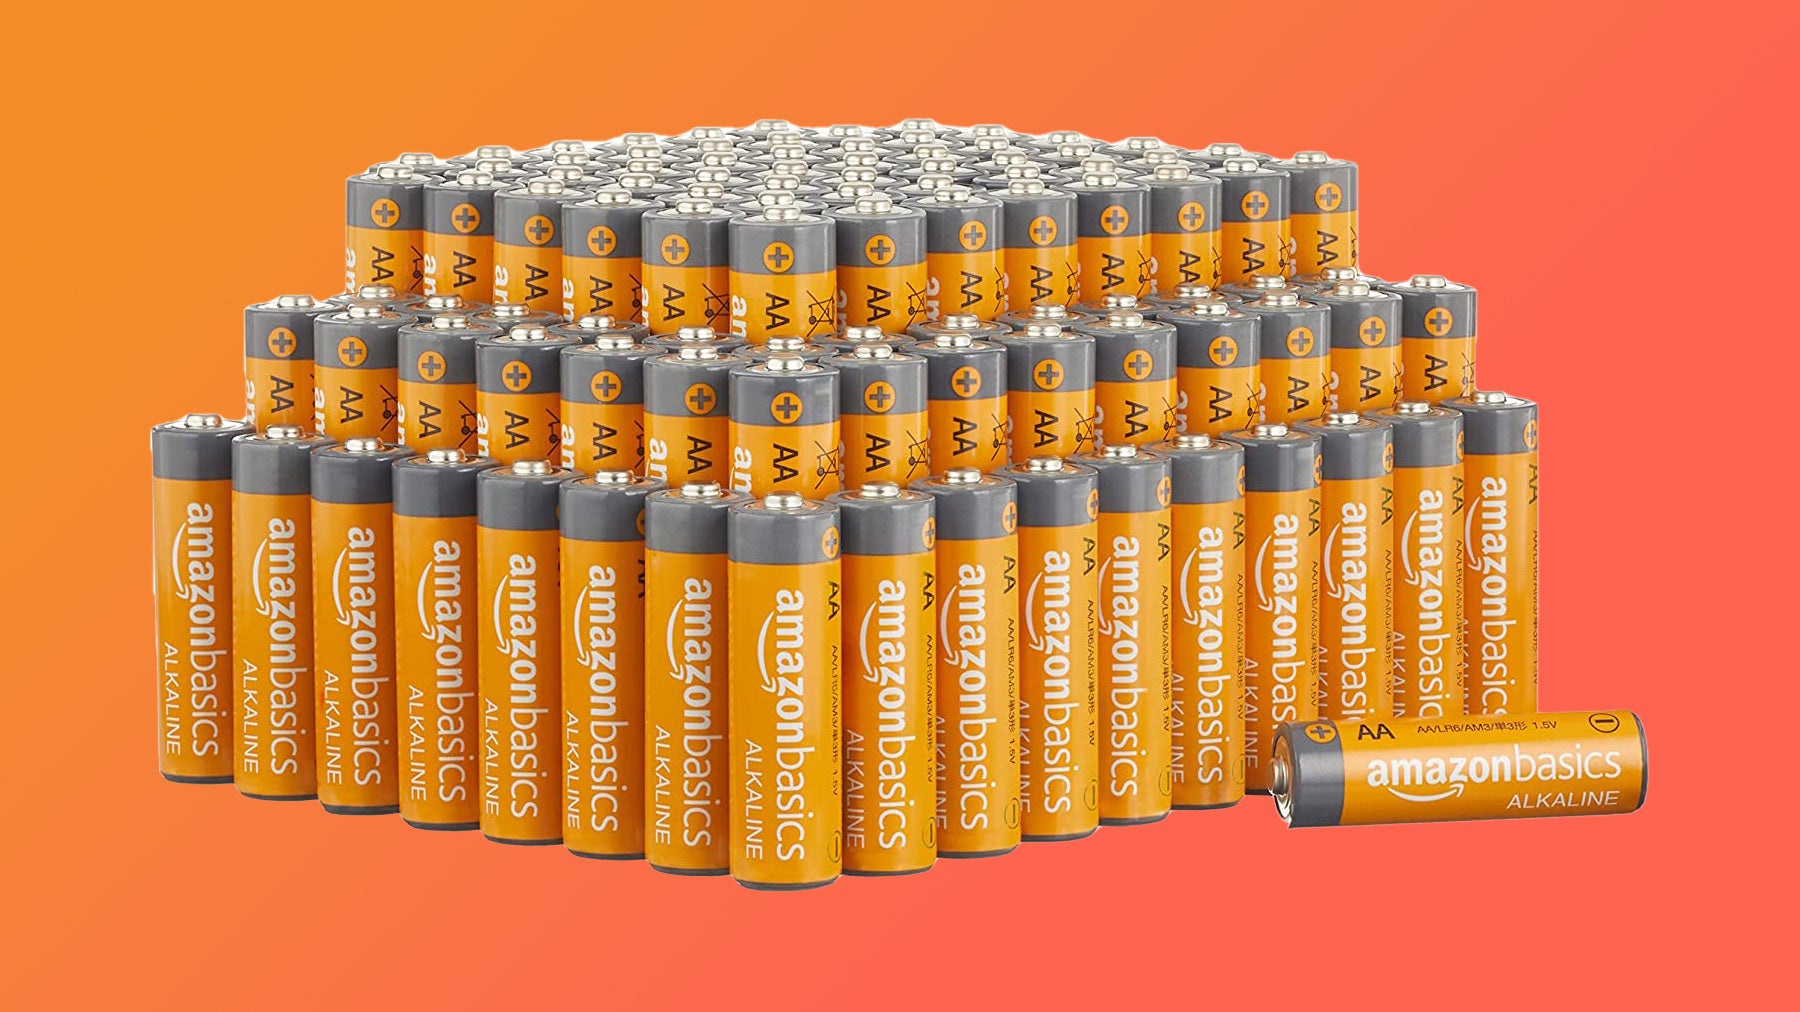 Charge up your game controllers with 100 AA batteries for £13